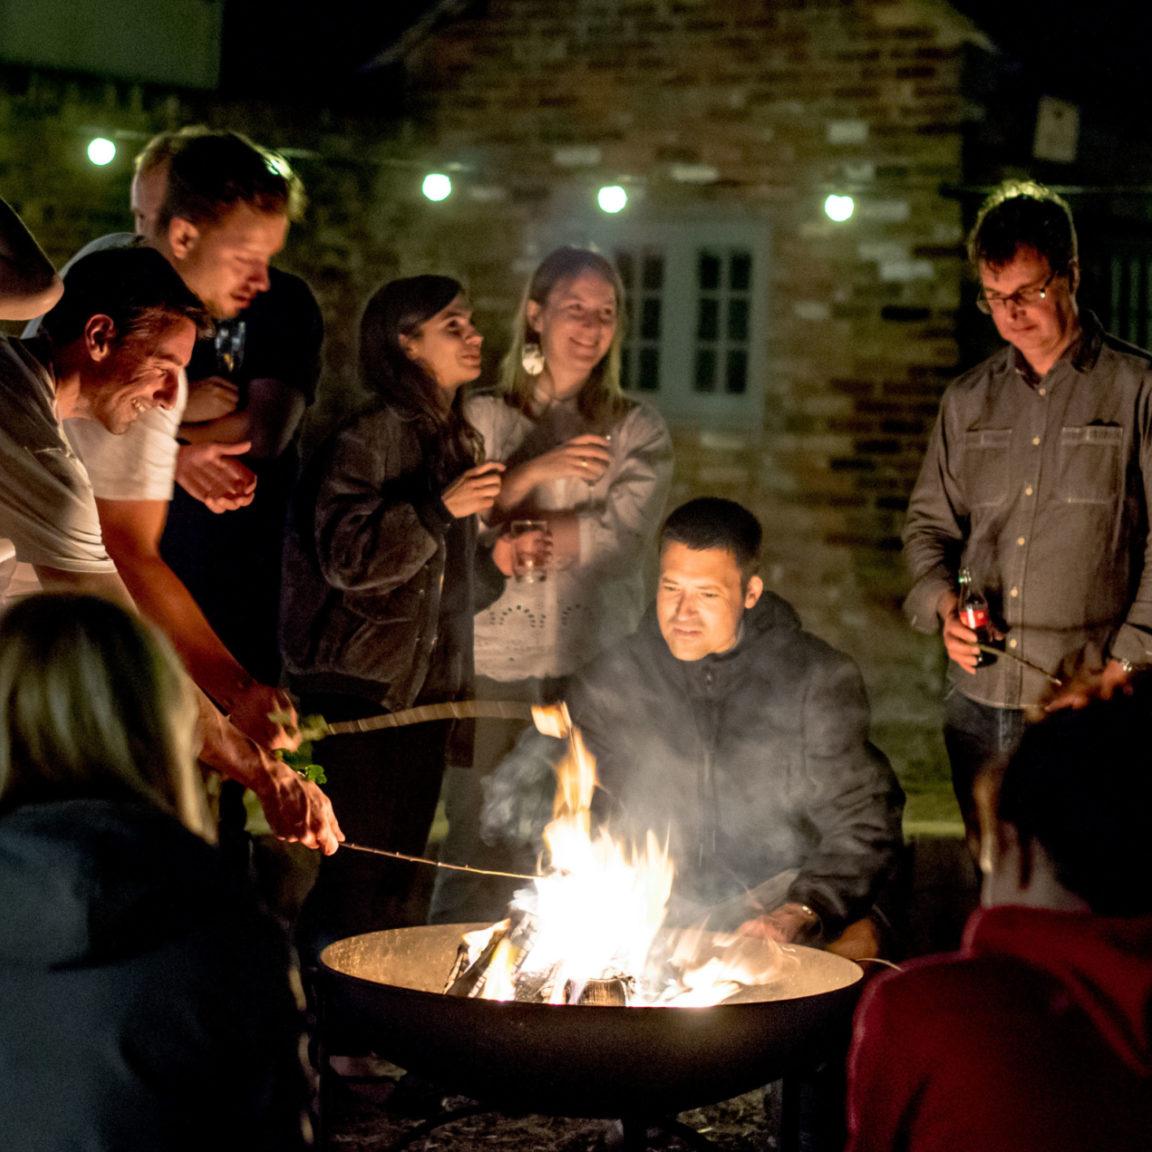 group of people around fire pit